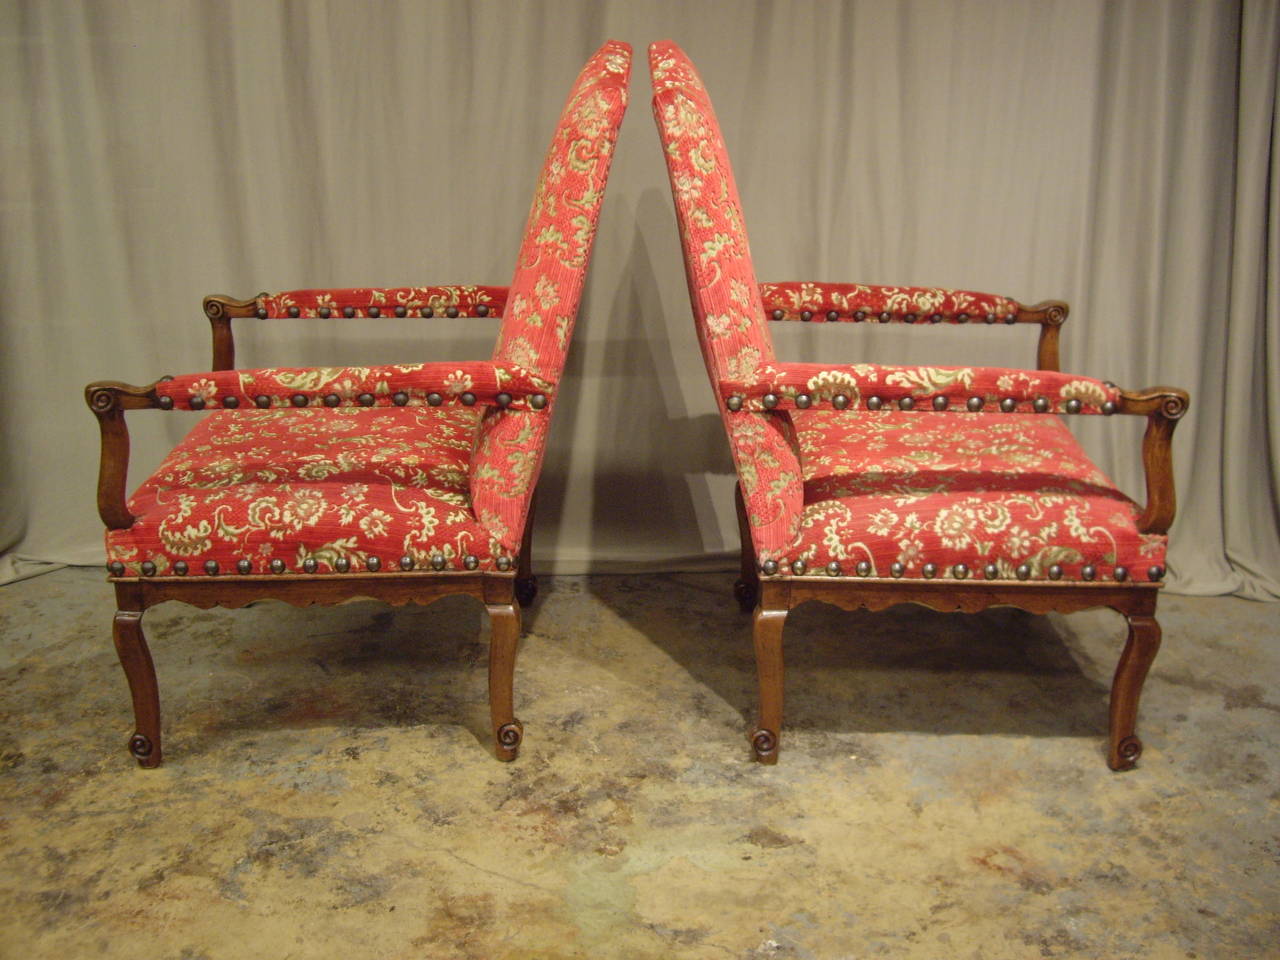 Elegant pair of Provincial French Regence armchairs. Delicate carving and graceful proportions. The chairs have been carefully restored and French polished. Arm height is 26.50. The chairs are transitional in the period between Regence and Louis XV.